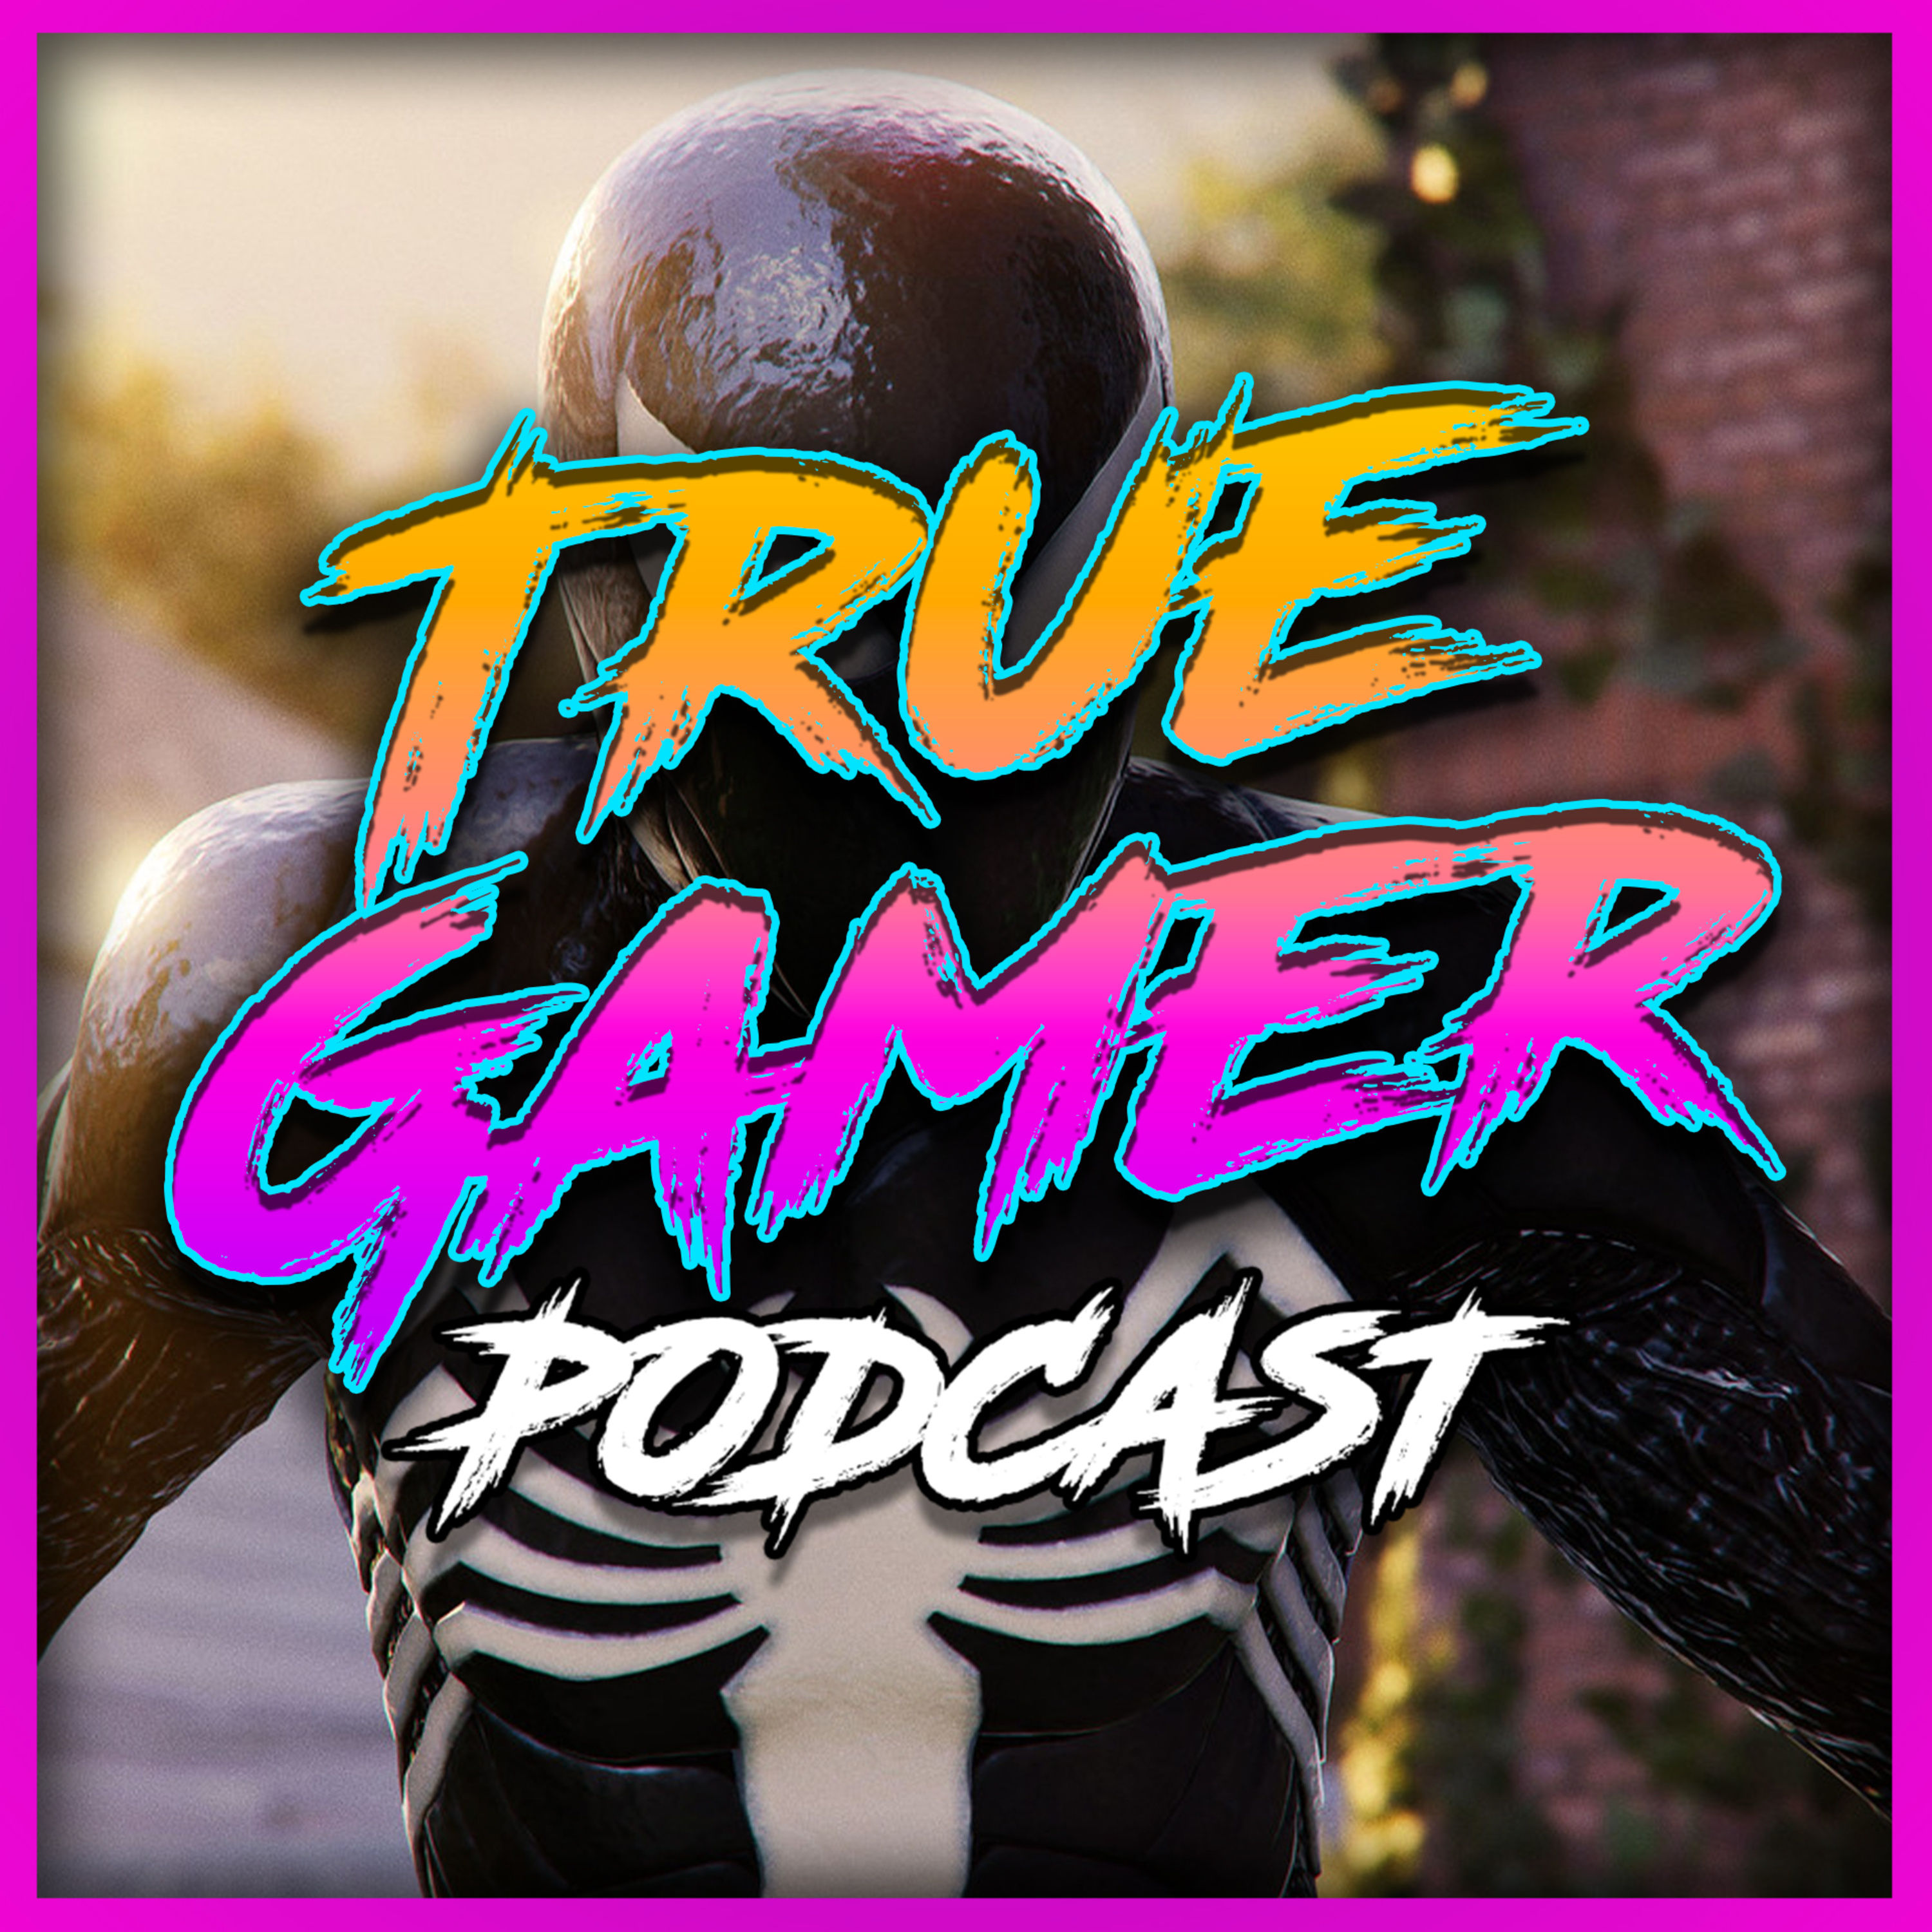 Playstation Showcase was a Disappointment... - True Gamer Podcast Ep. 118